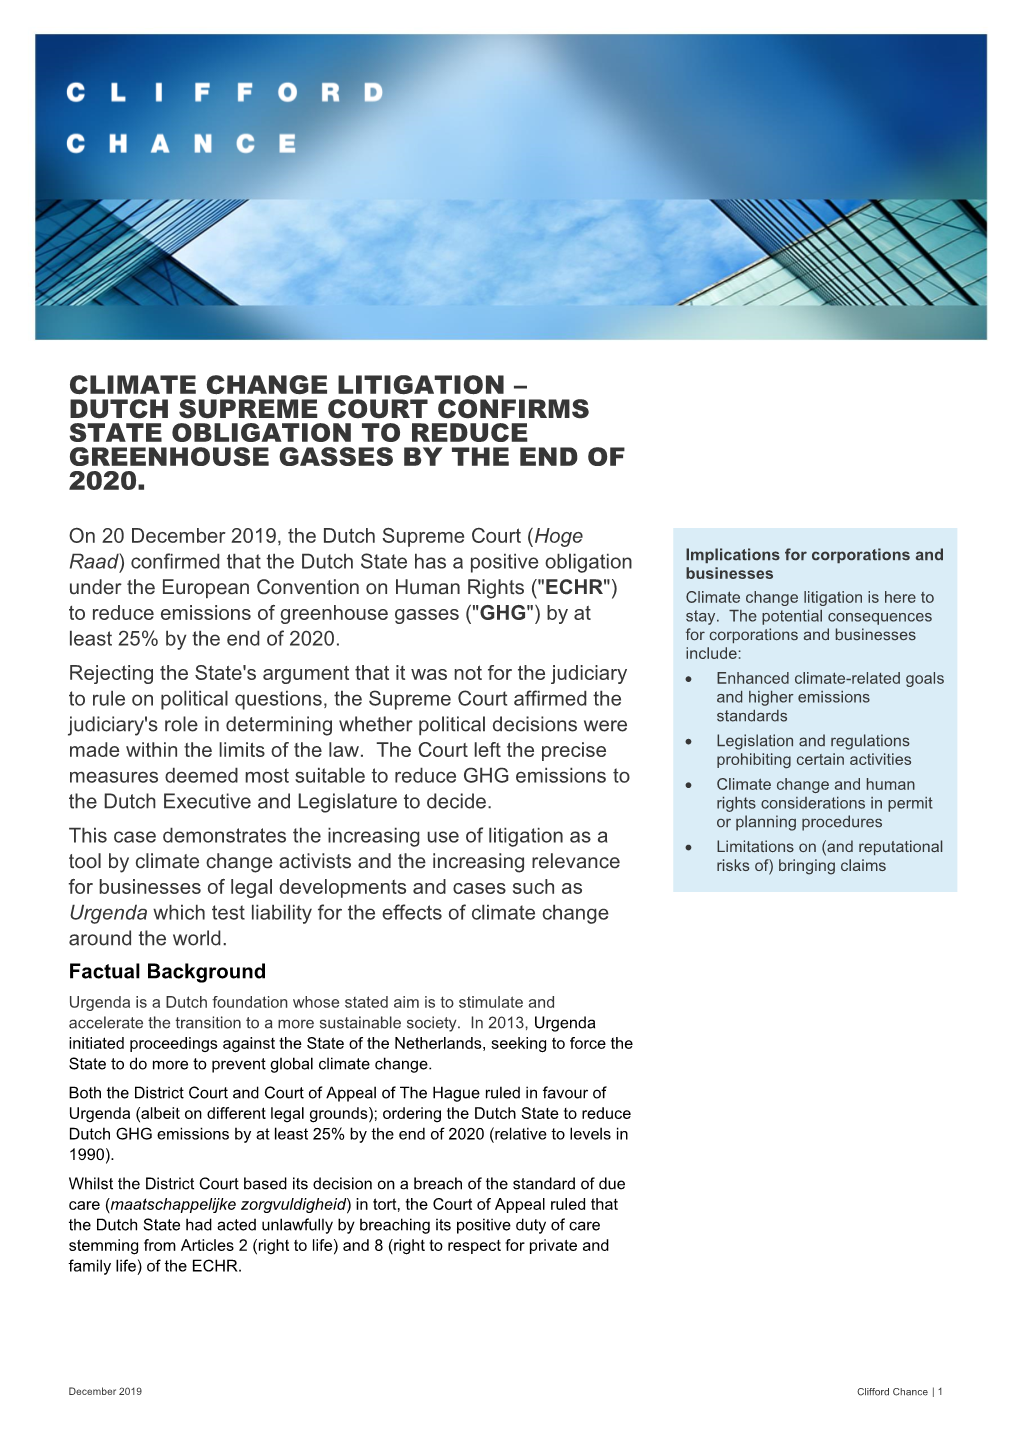 Climate Change Litigation – Dutch Supreme Court Confirms State Obligation to Reduce Greenhouse Gasses by the End of 2020